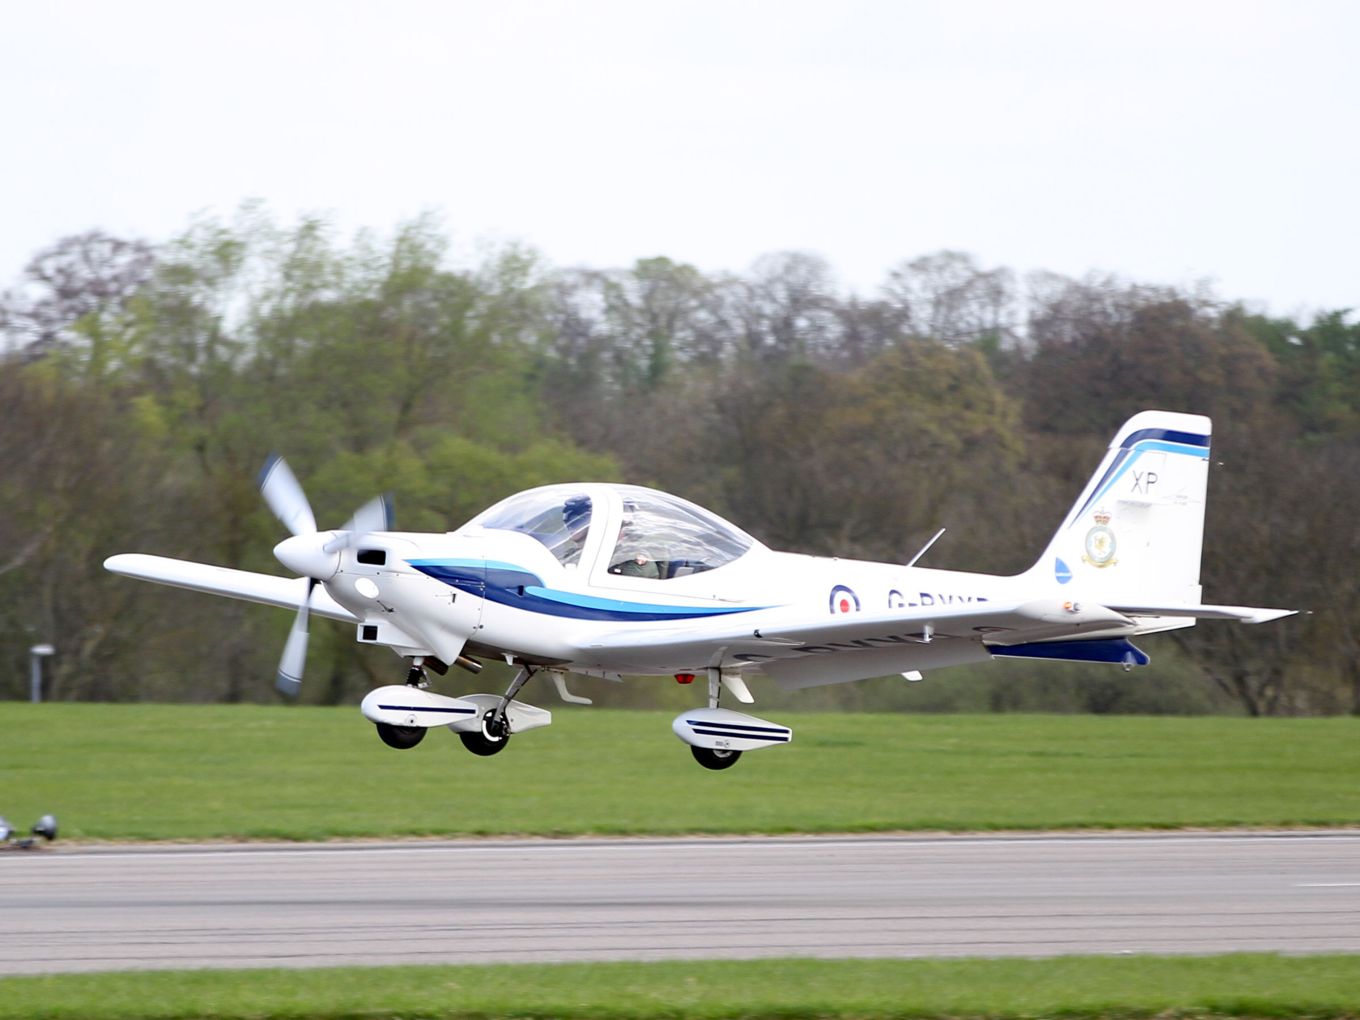 A Grob Tutor landing at RAF Wittering in 2014